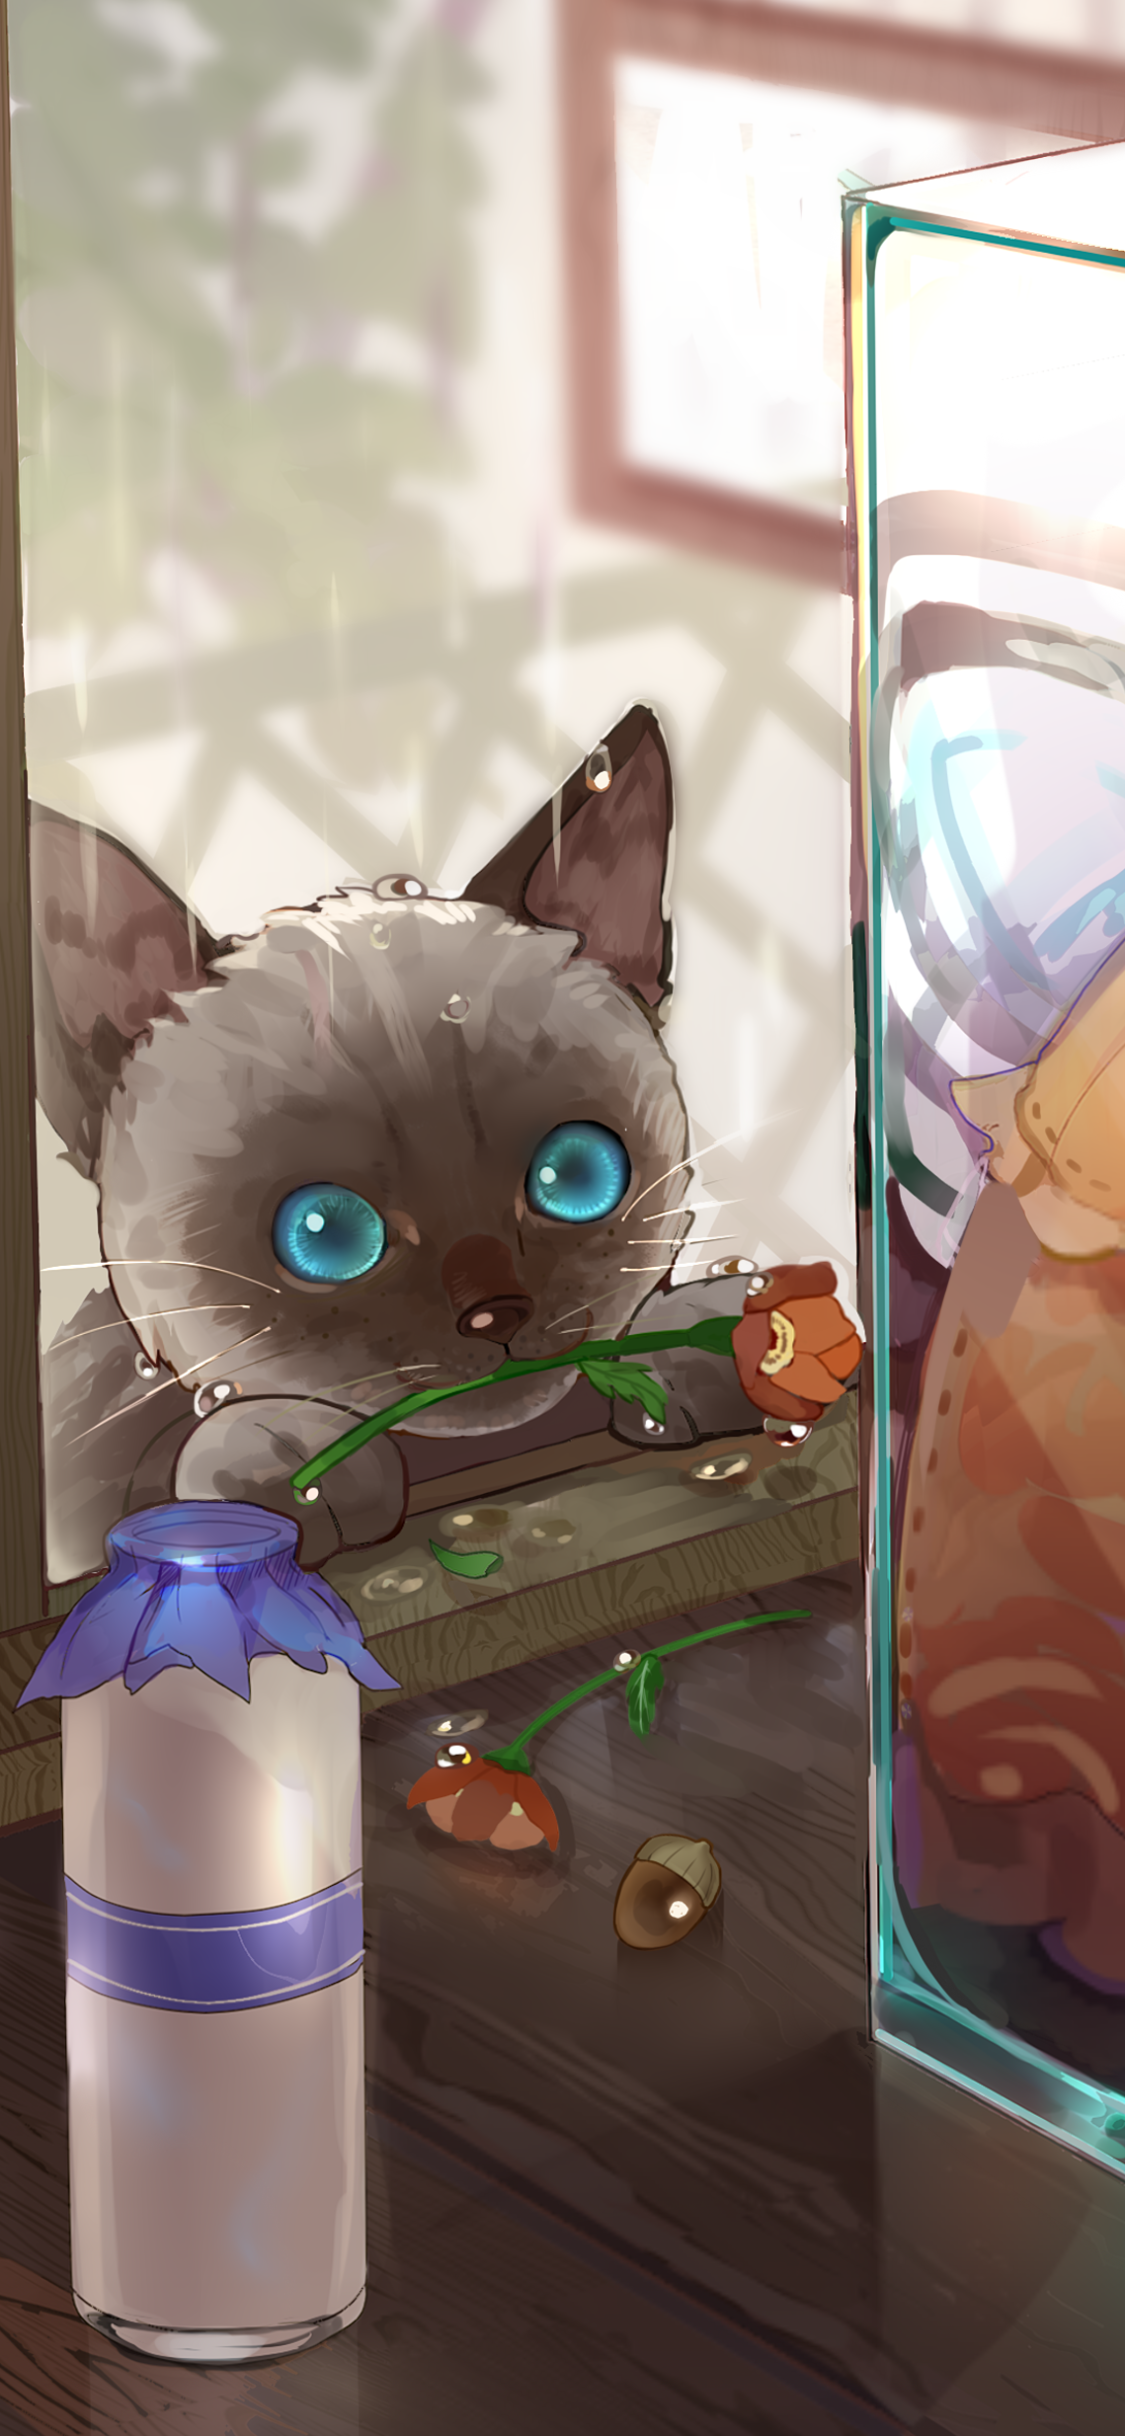 Blue eyed cat looking into a shop by 飾ひさ